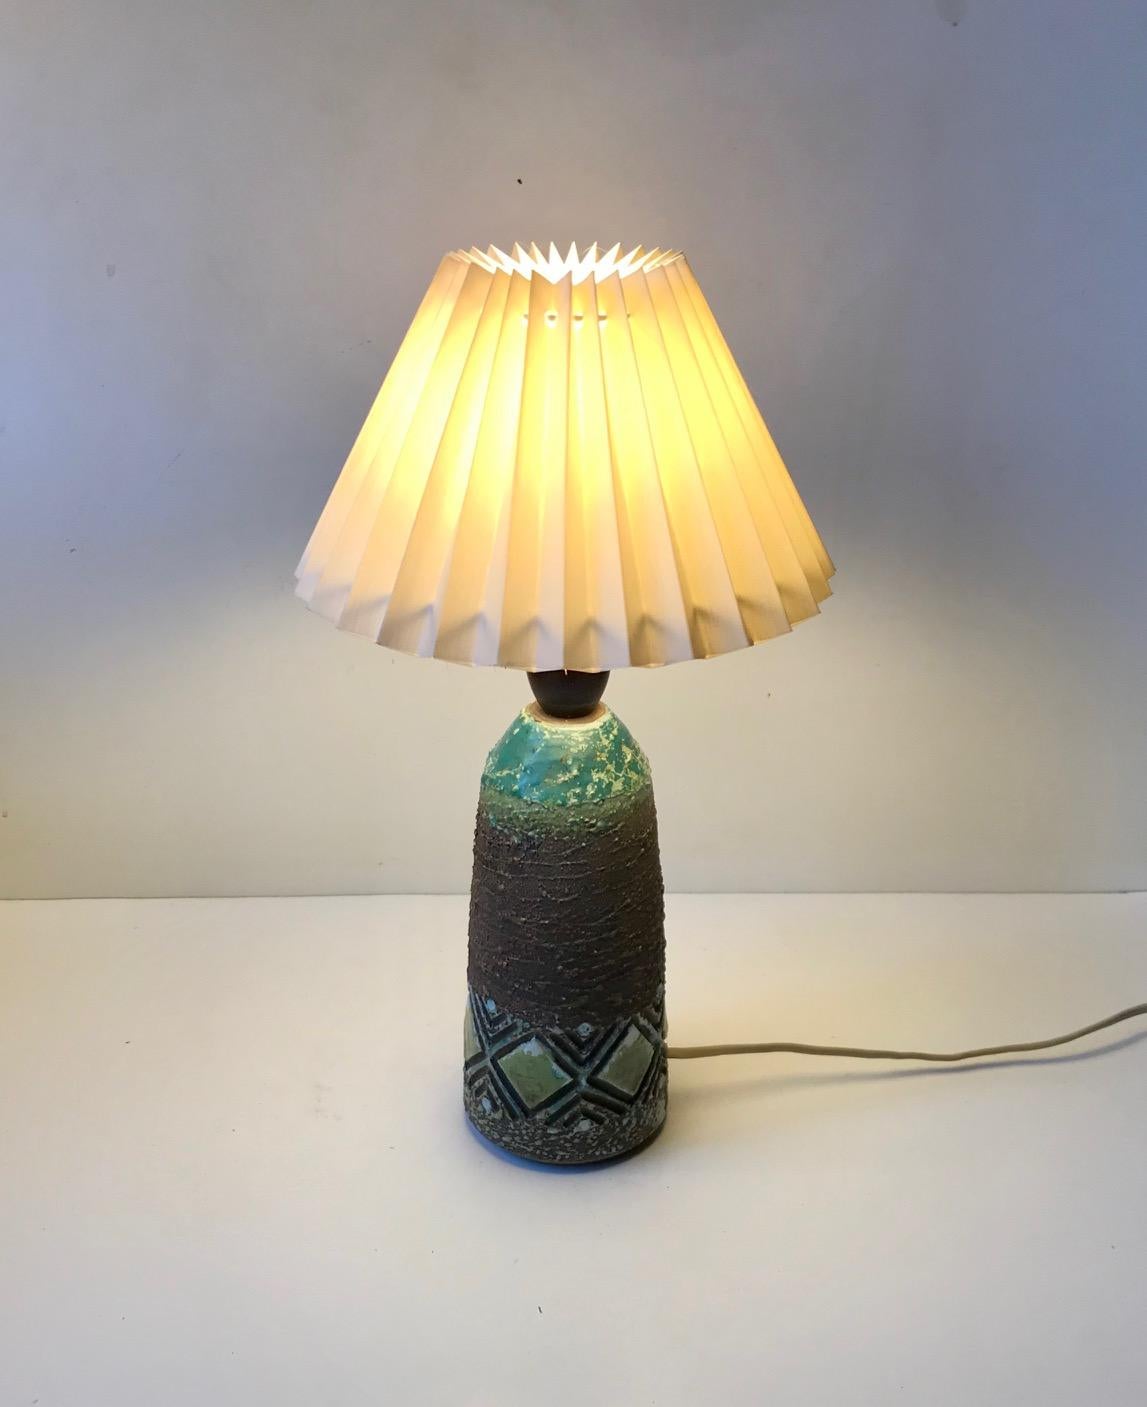 An earthy brown table light decorated with diamond patterns and splashes of turquoise, green and white glazes. It was designed by Gertrud Hertner and made at Tilgmans Keramik in Sweden circa 1960-65. The light features on/of switch to its bakelite